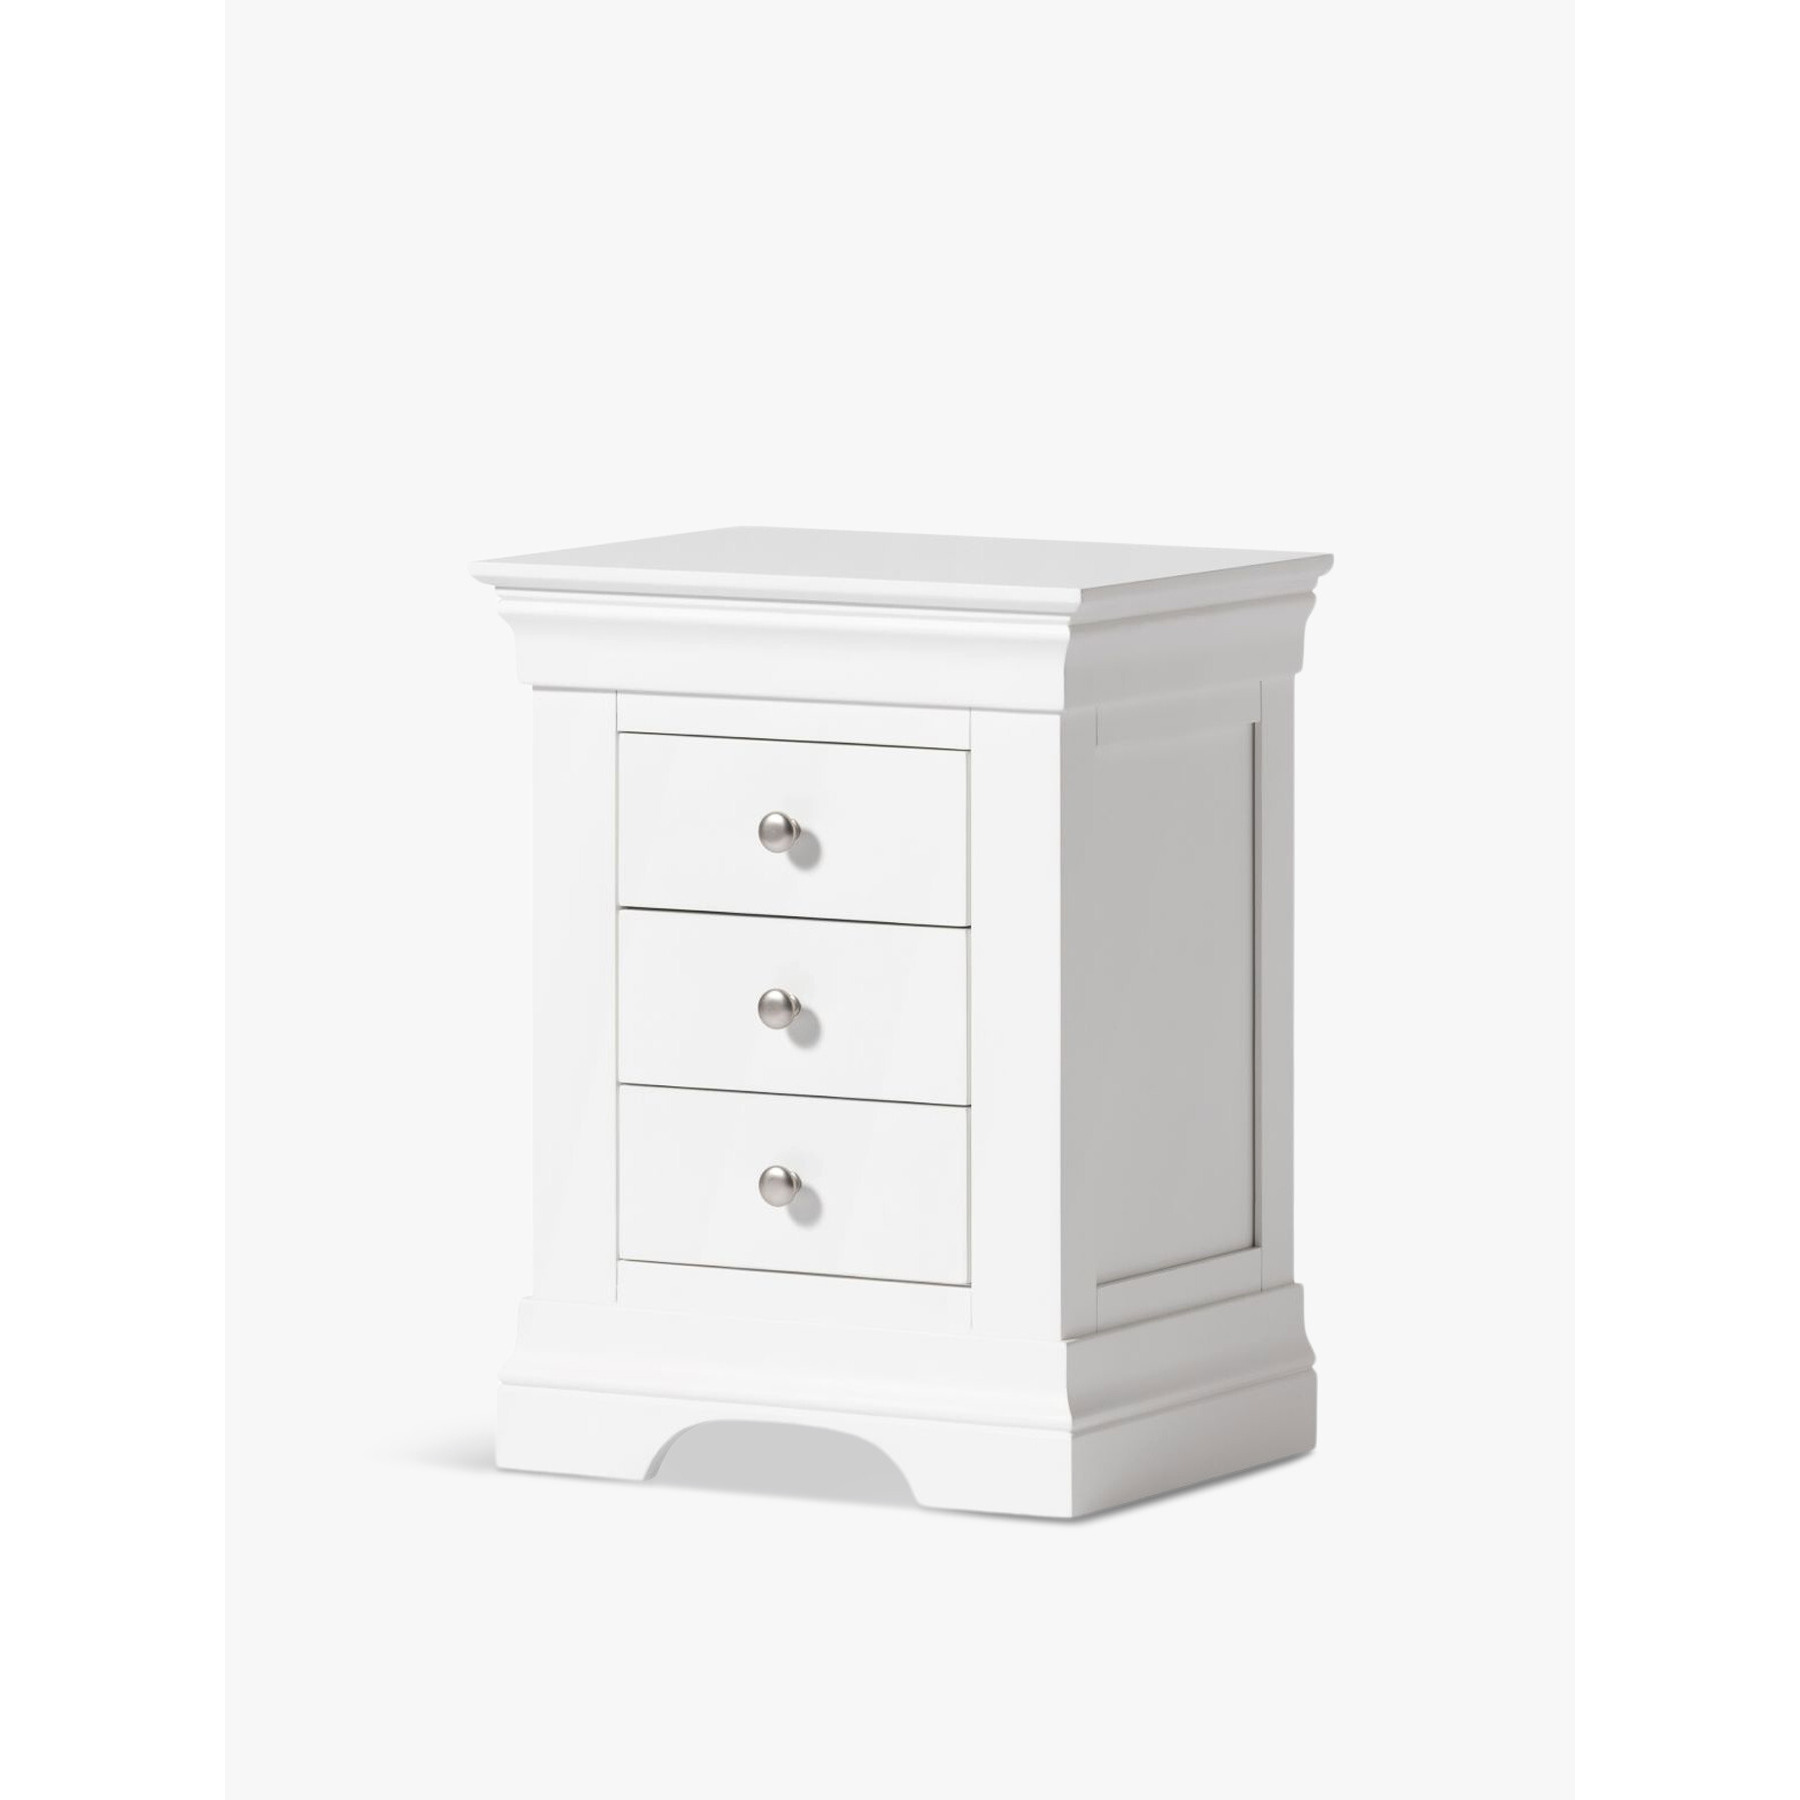 Bell & Stoccherro Castle Combe 3 Draw Bedside Table Grey - image 1